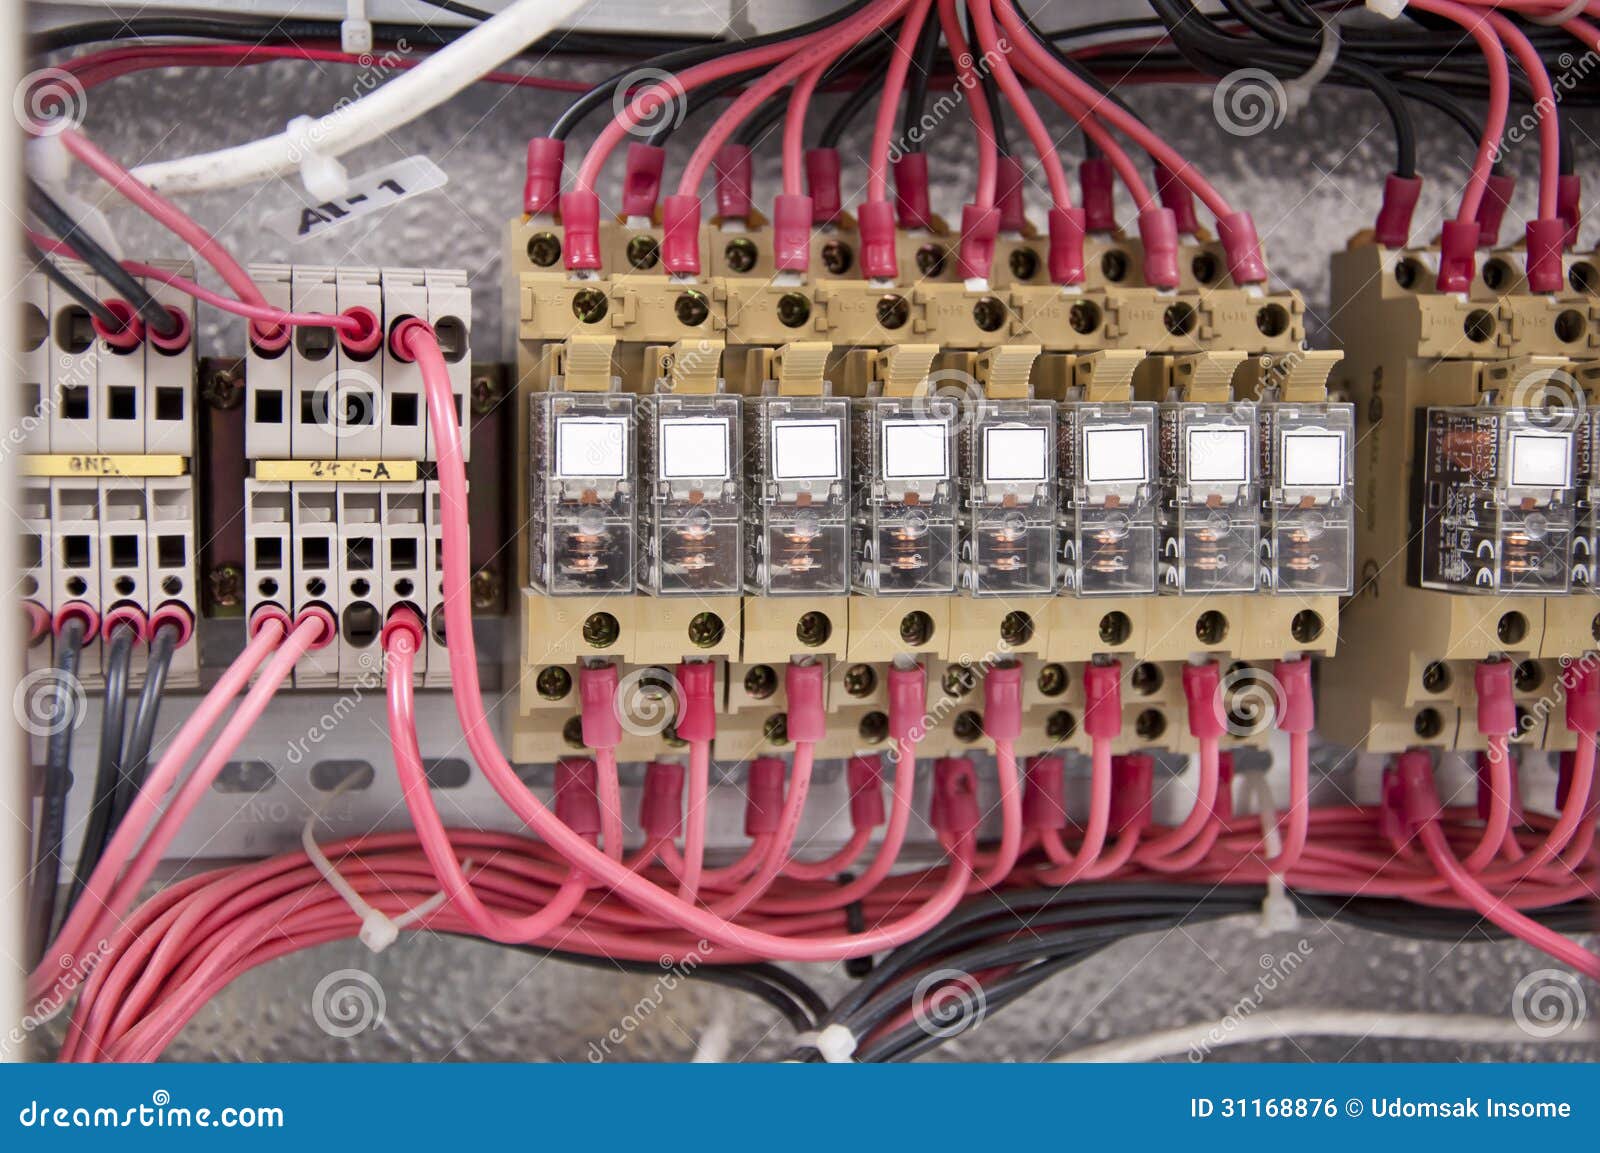 Electrical Wiring Control Panel Diagram Royalty Free Stock Image